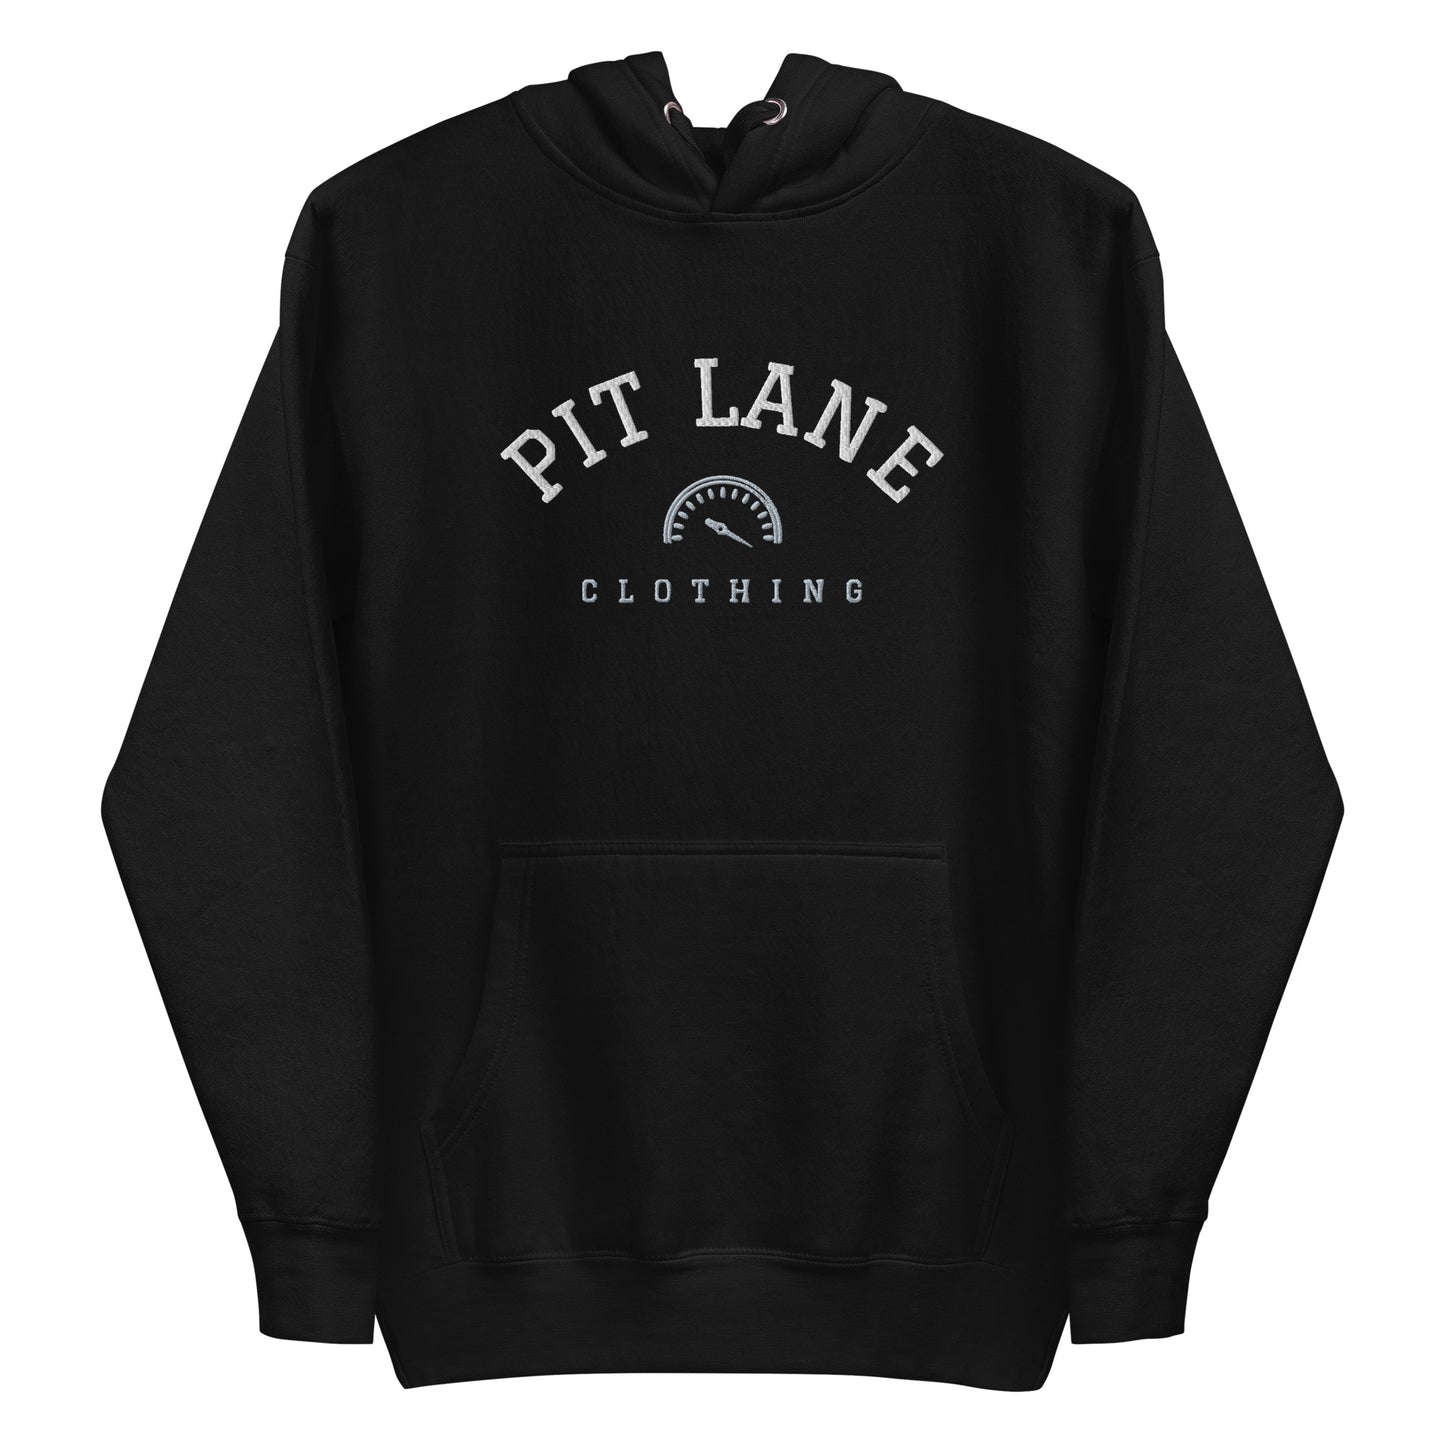 PIT LANE CLOTHING Embroidered Cotton Fleece Mens Hoodie